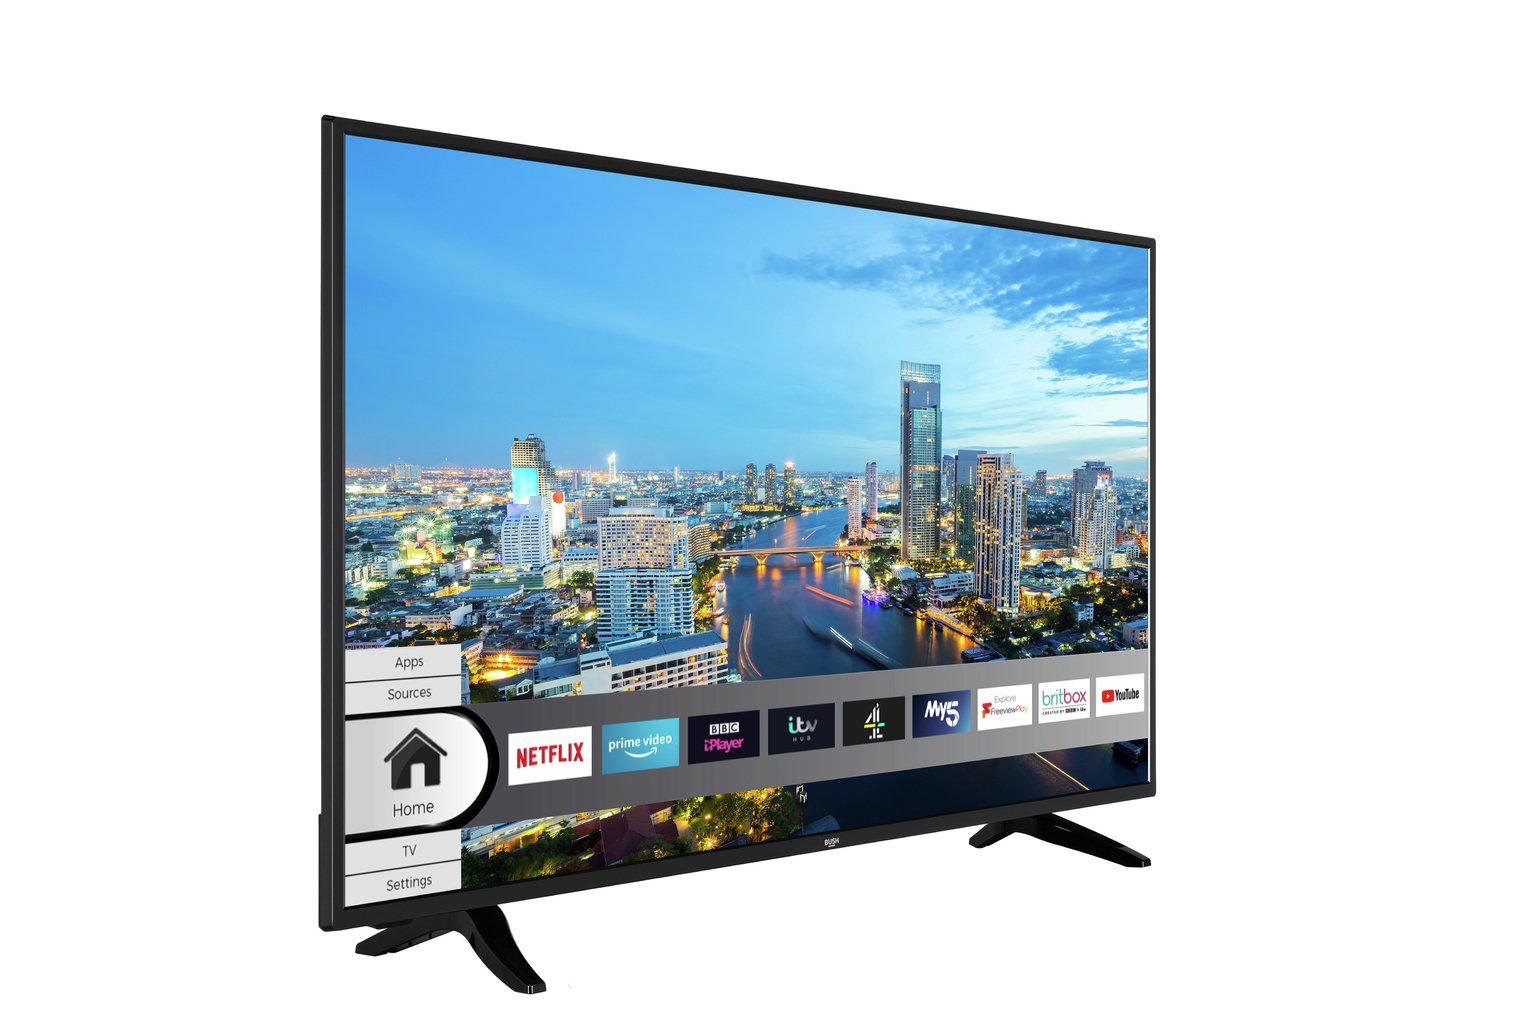 Bush 50 Inch Smart 4K Ultra HD DLED TV with HDR Review